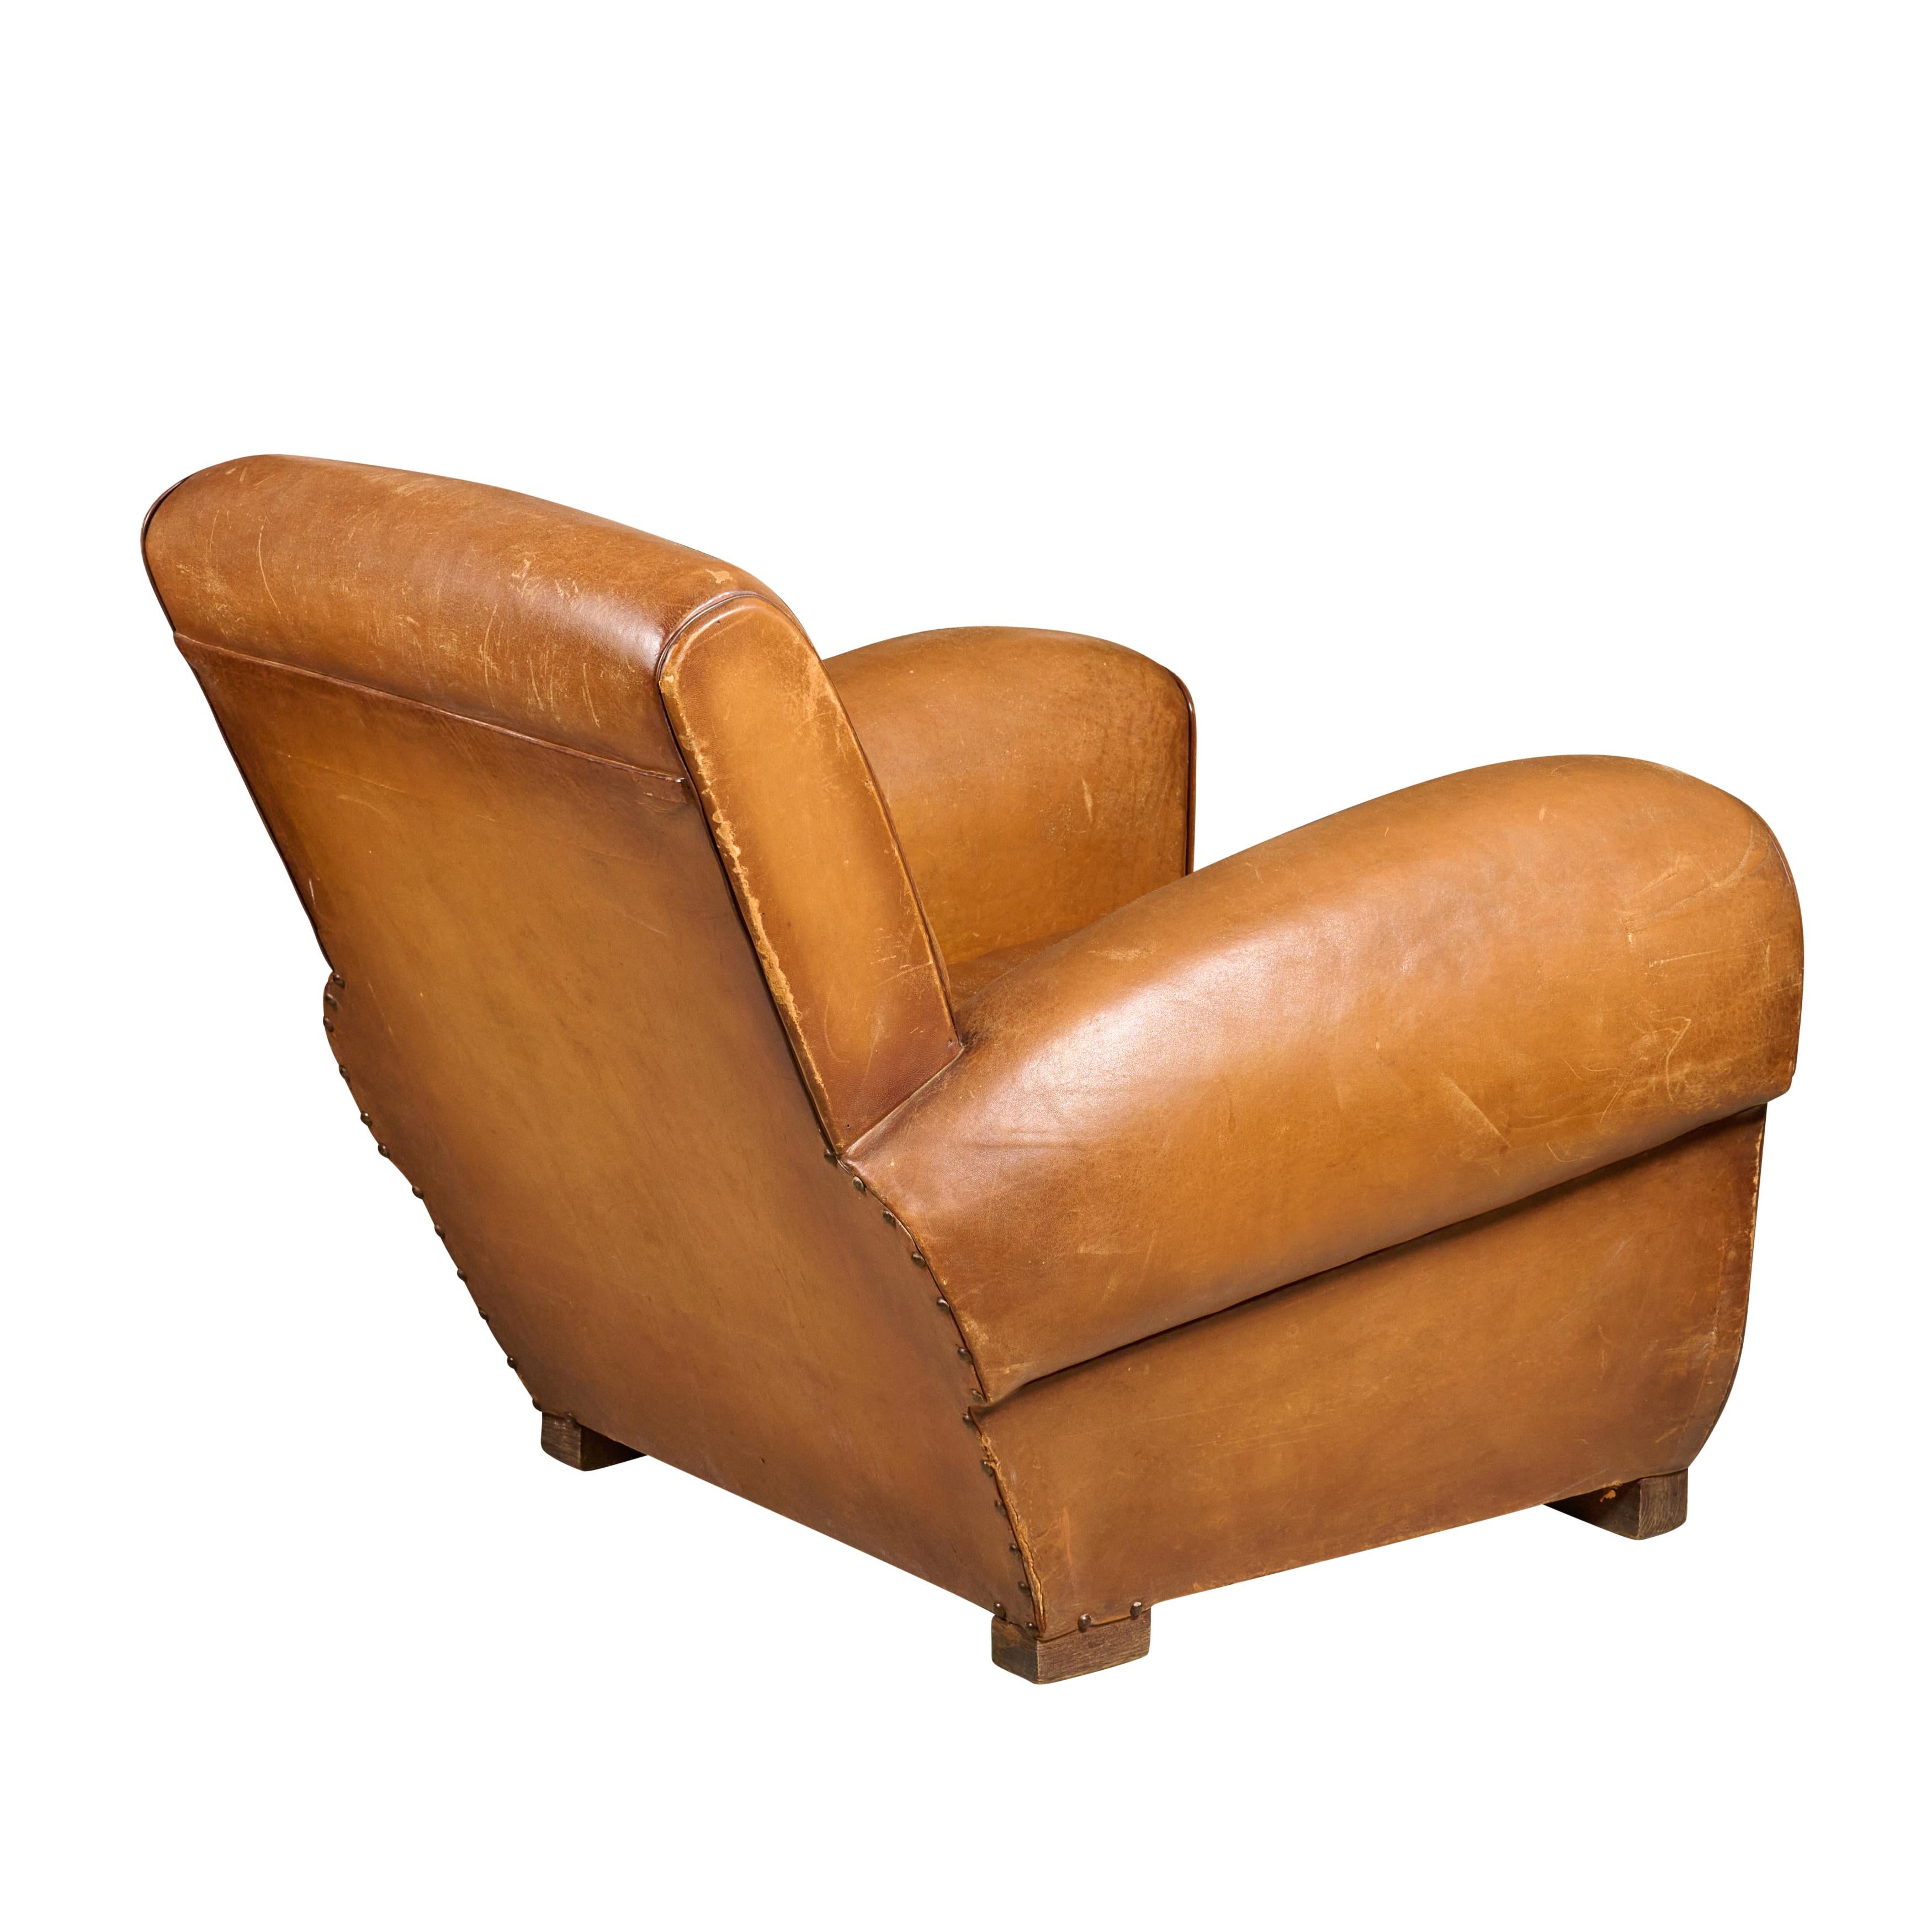 Mid-20th Century French Leather Club Chair For Sale